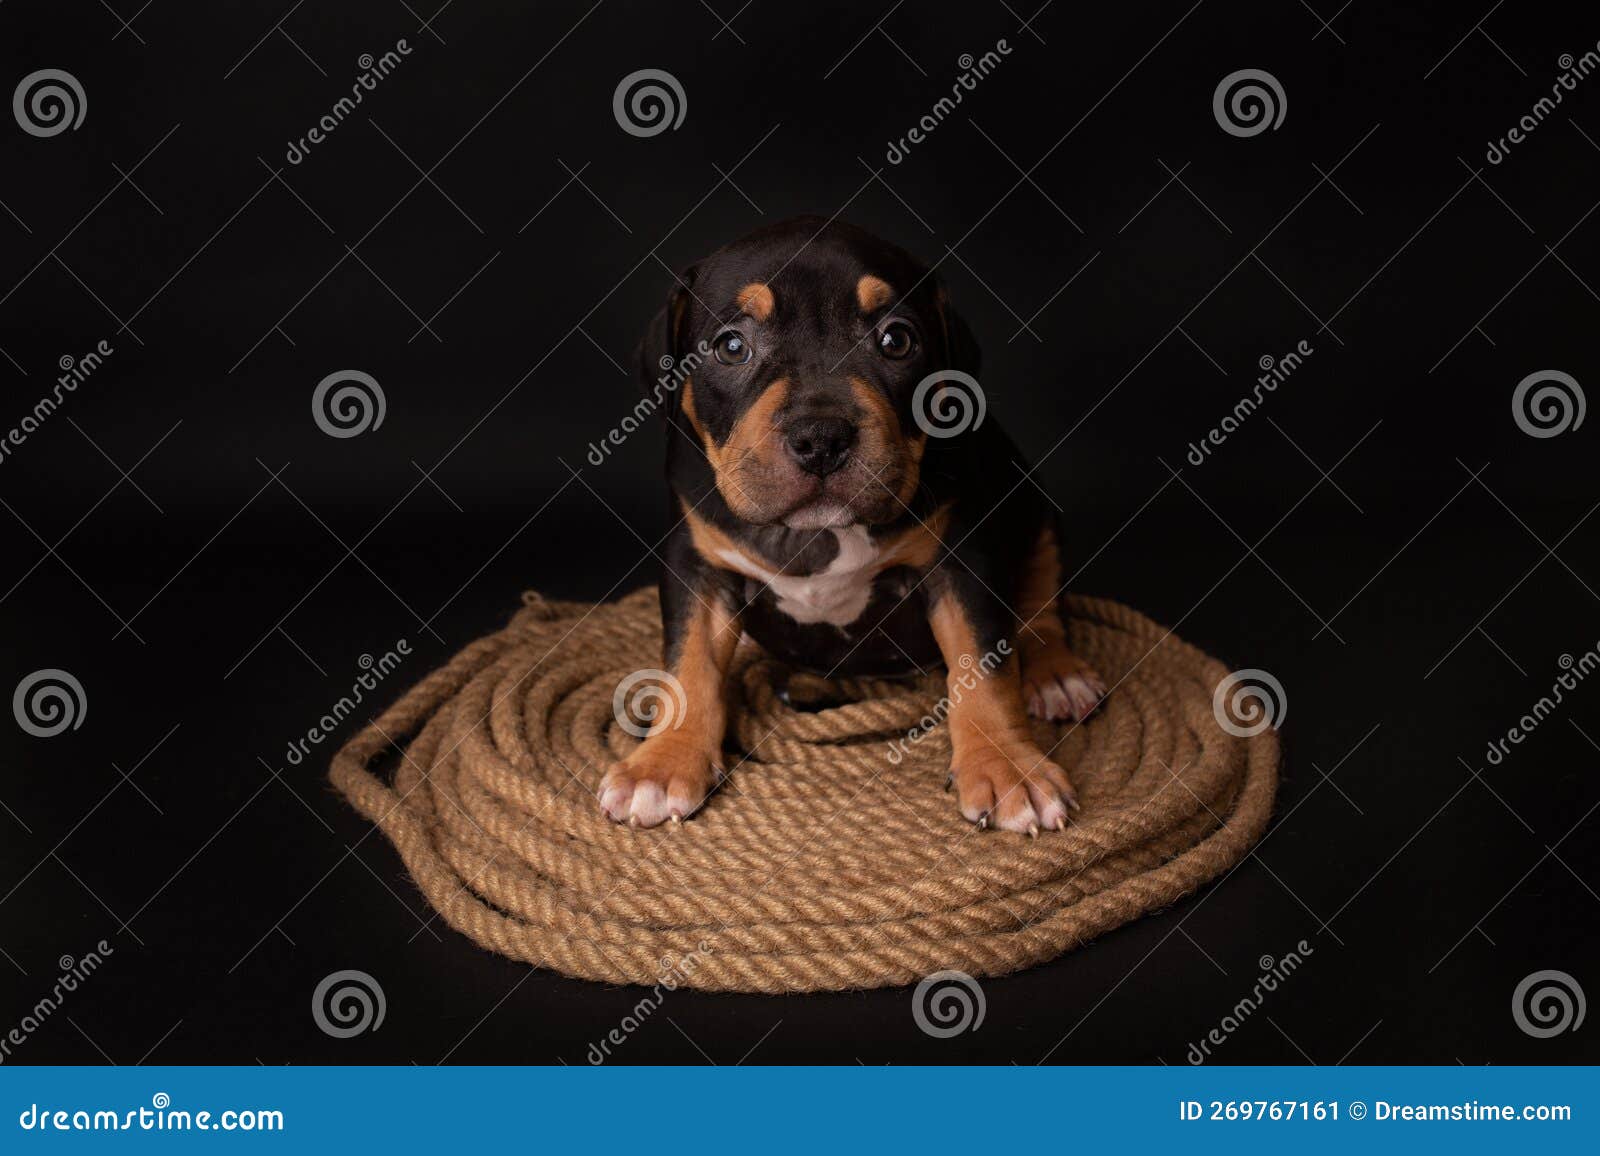 puppy american pit bull terrier sitt on a jute cord on black background